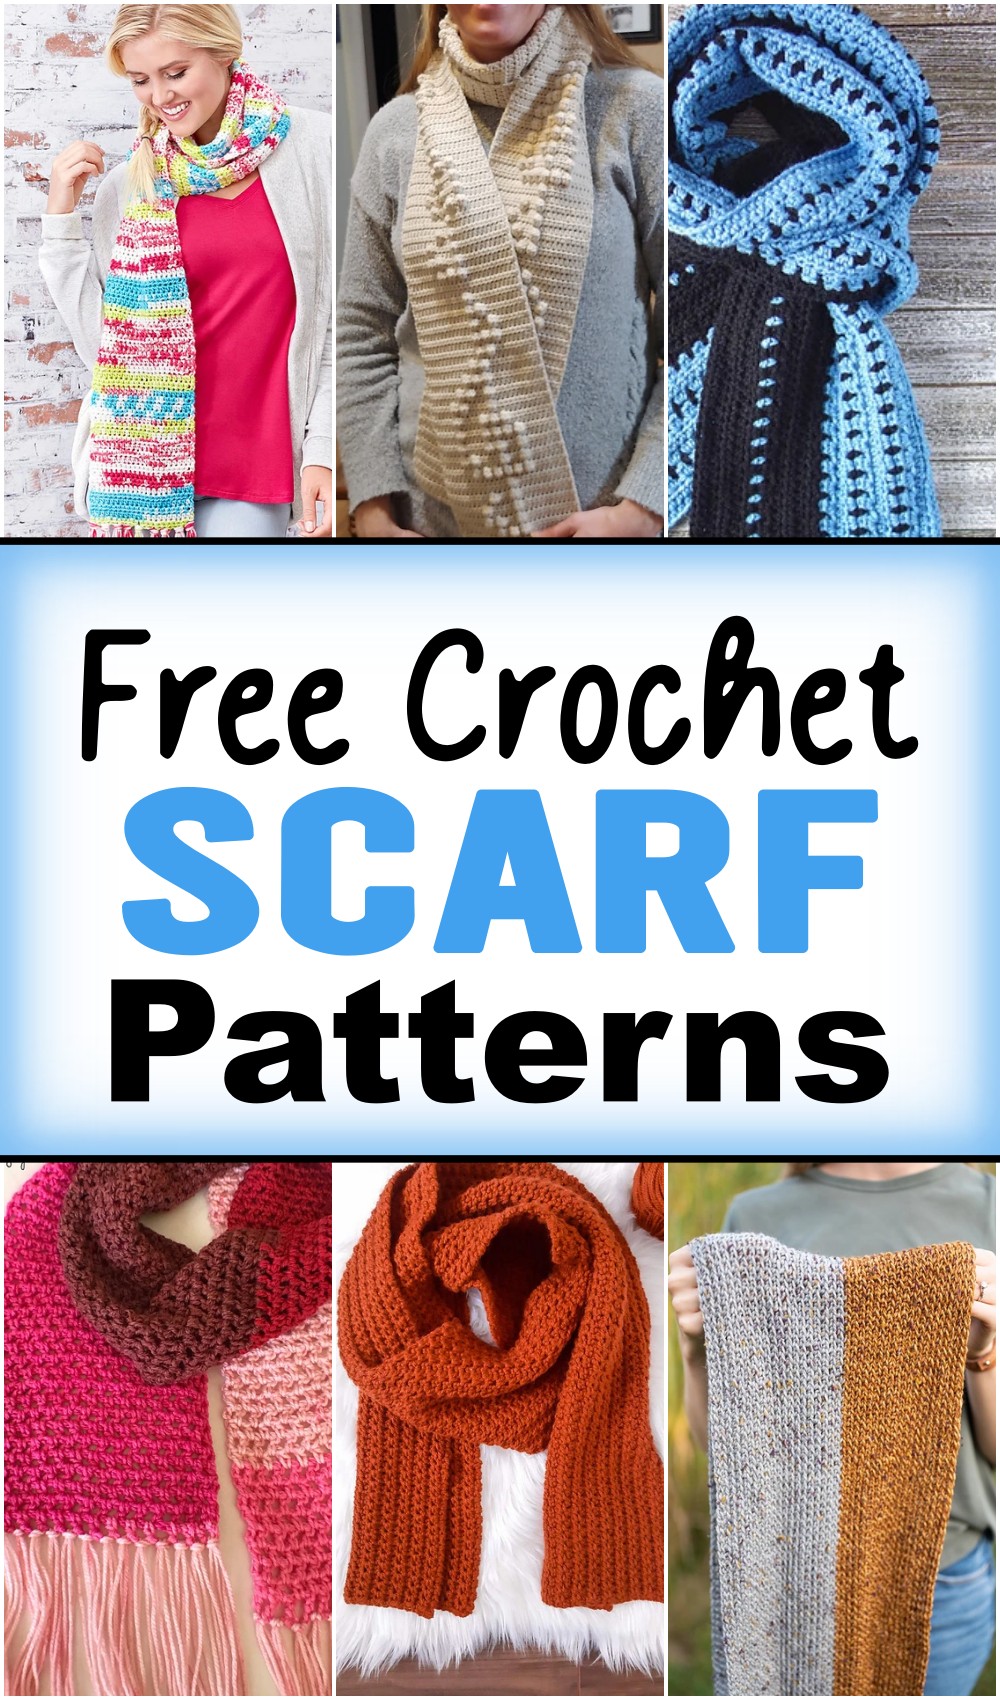 14 Easily Made Up Free Crochet Scarf Patterns & Images